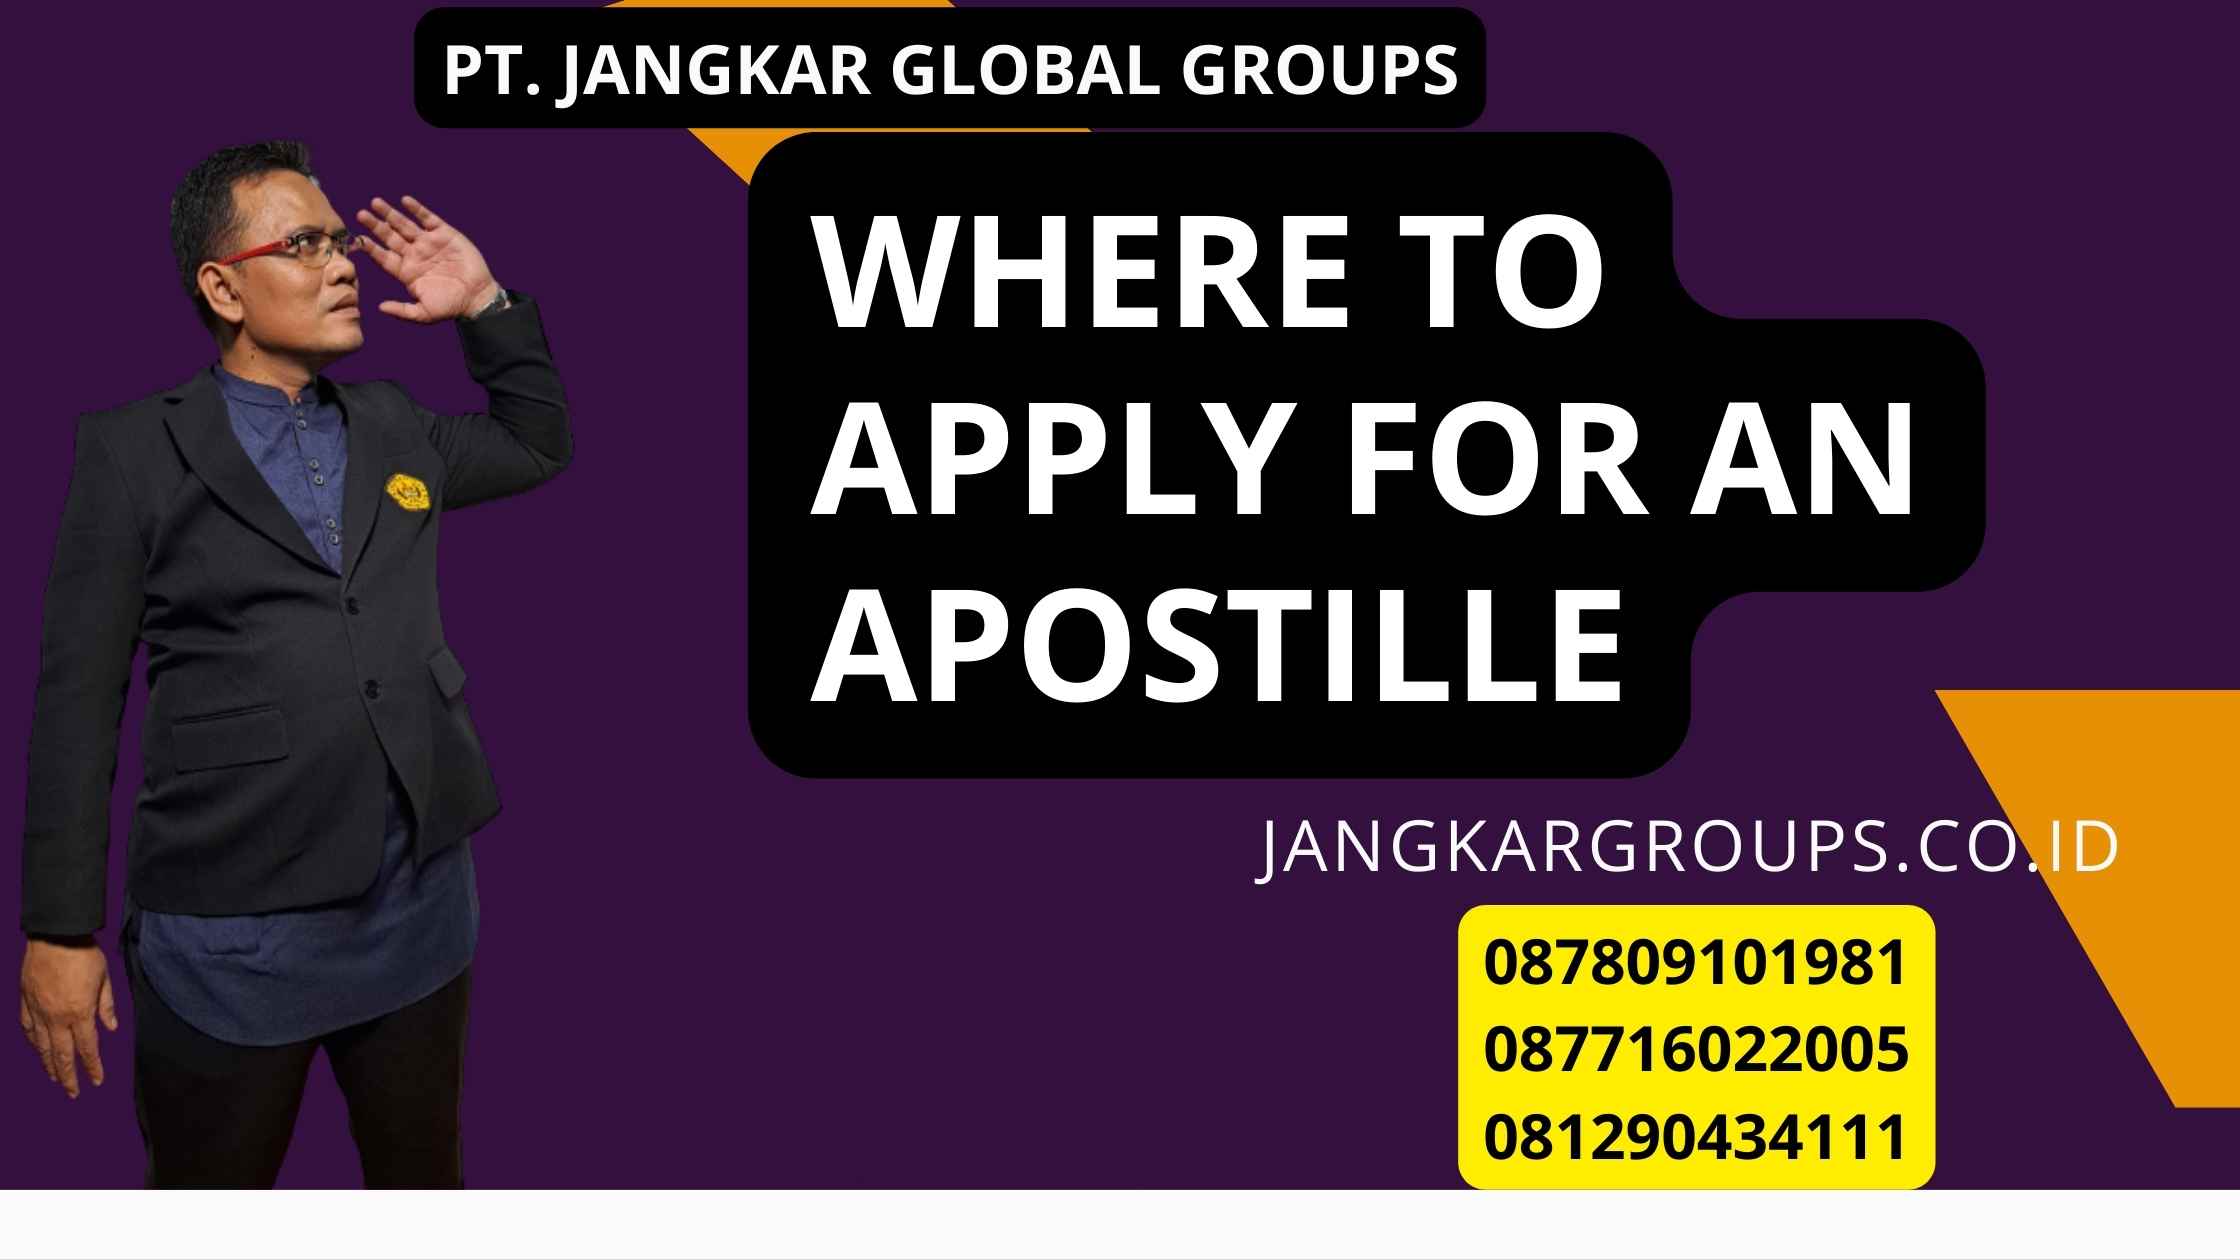 Where To Apply For An Apostille